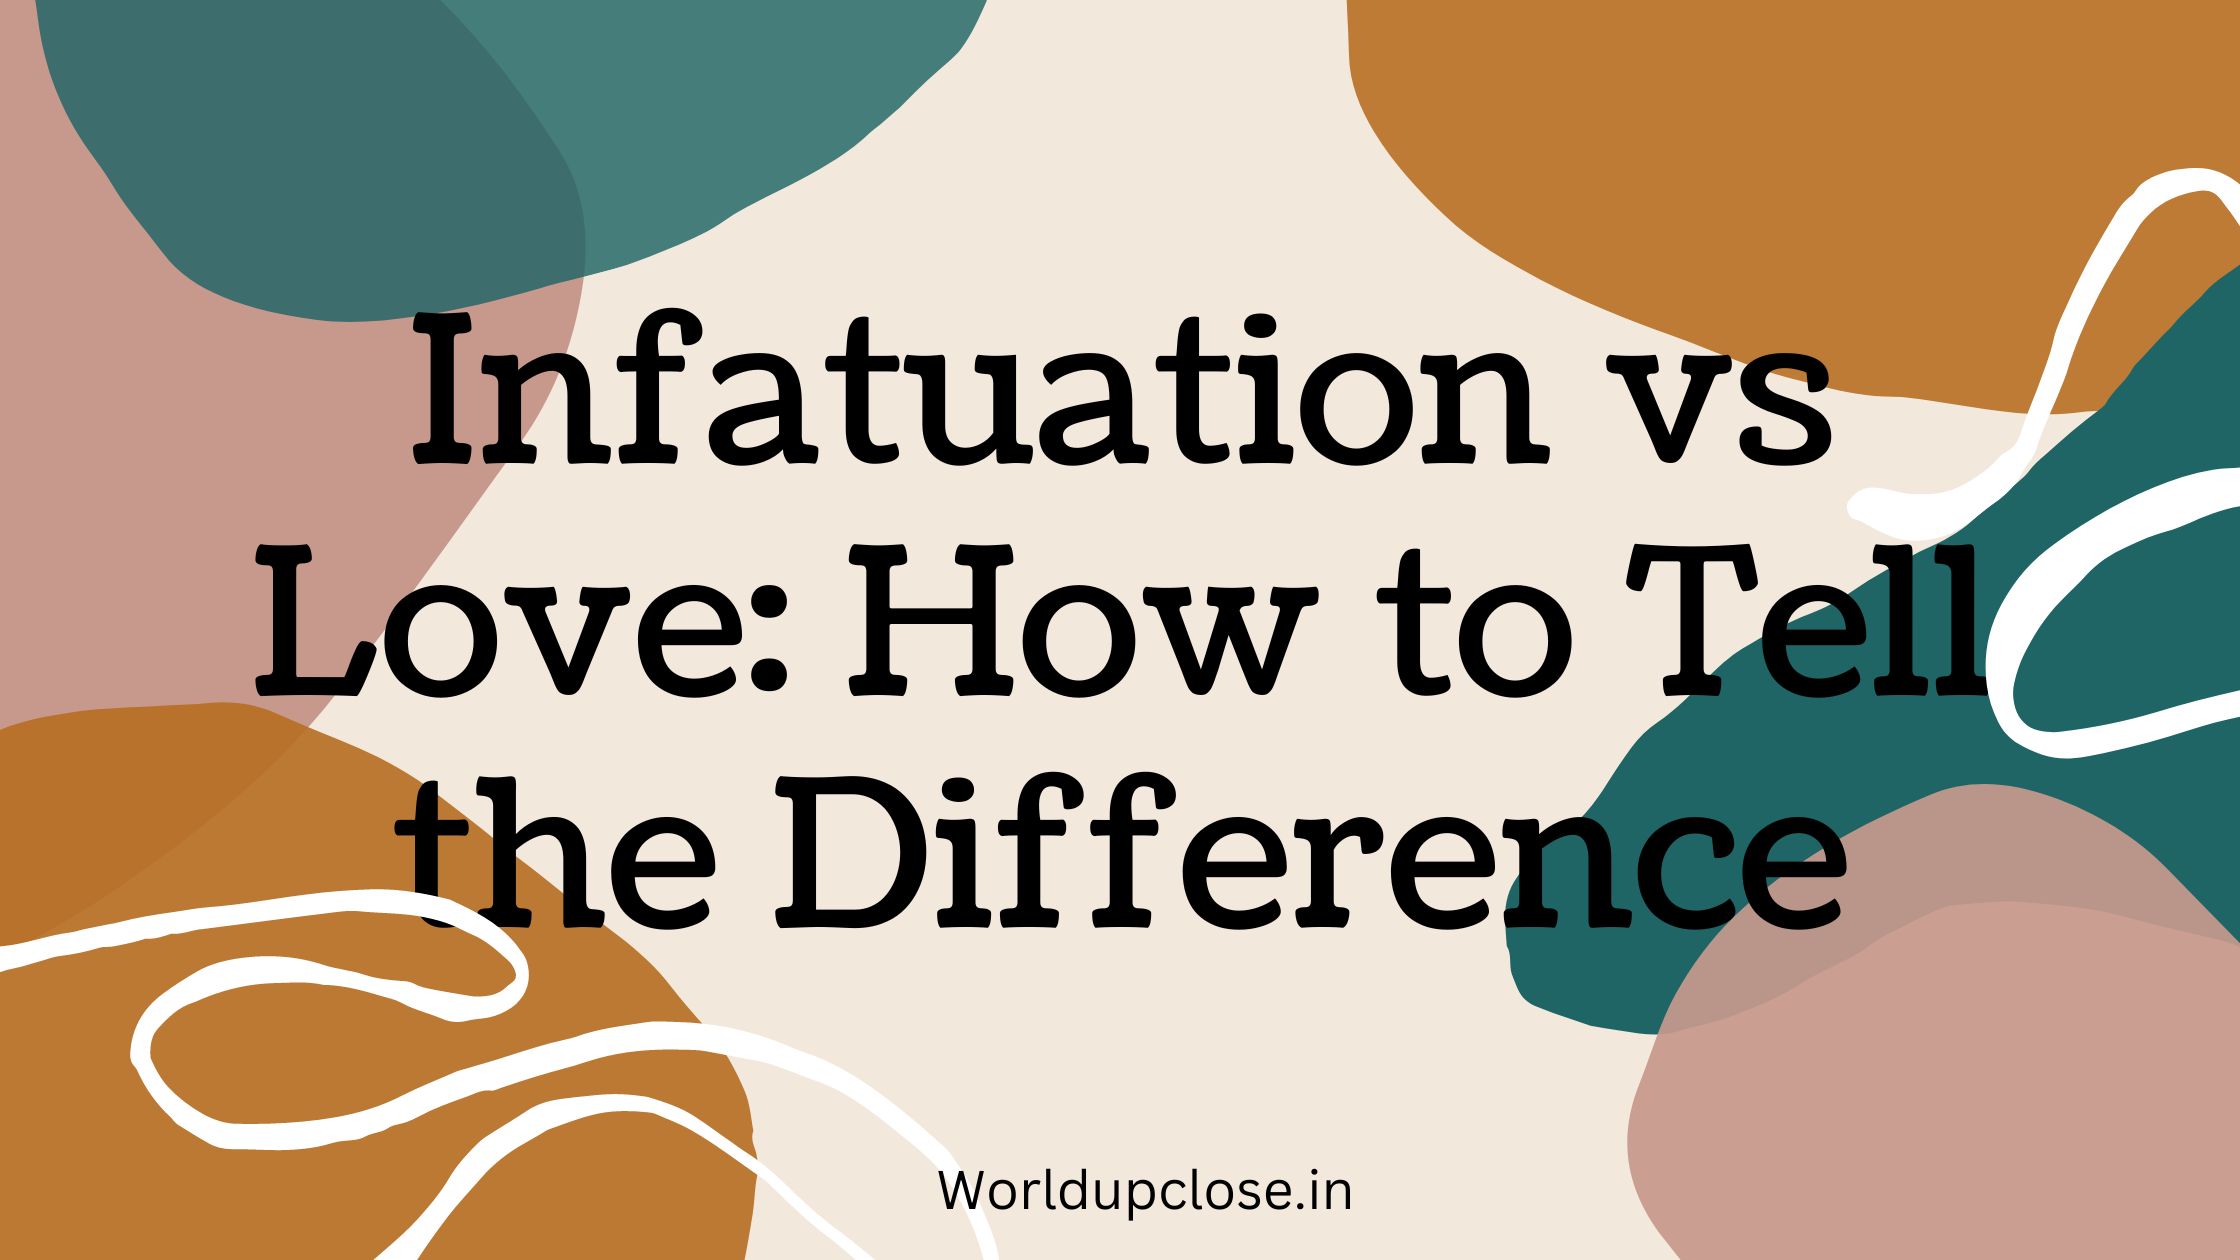 Infatuation vs Love: How to Tell the Difference 31